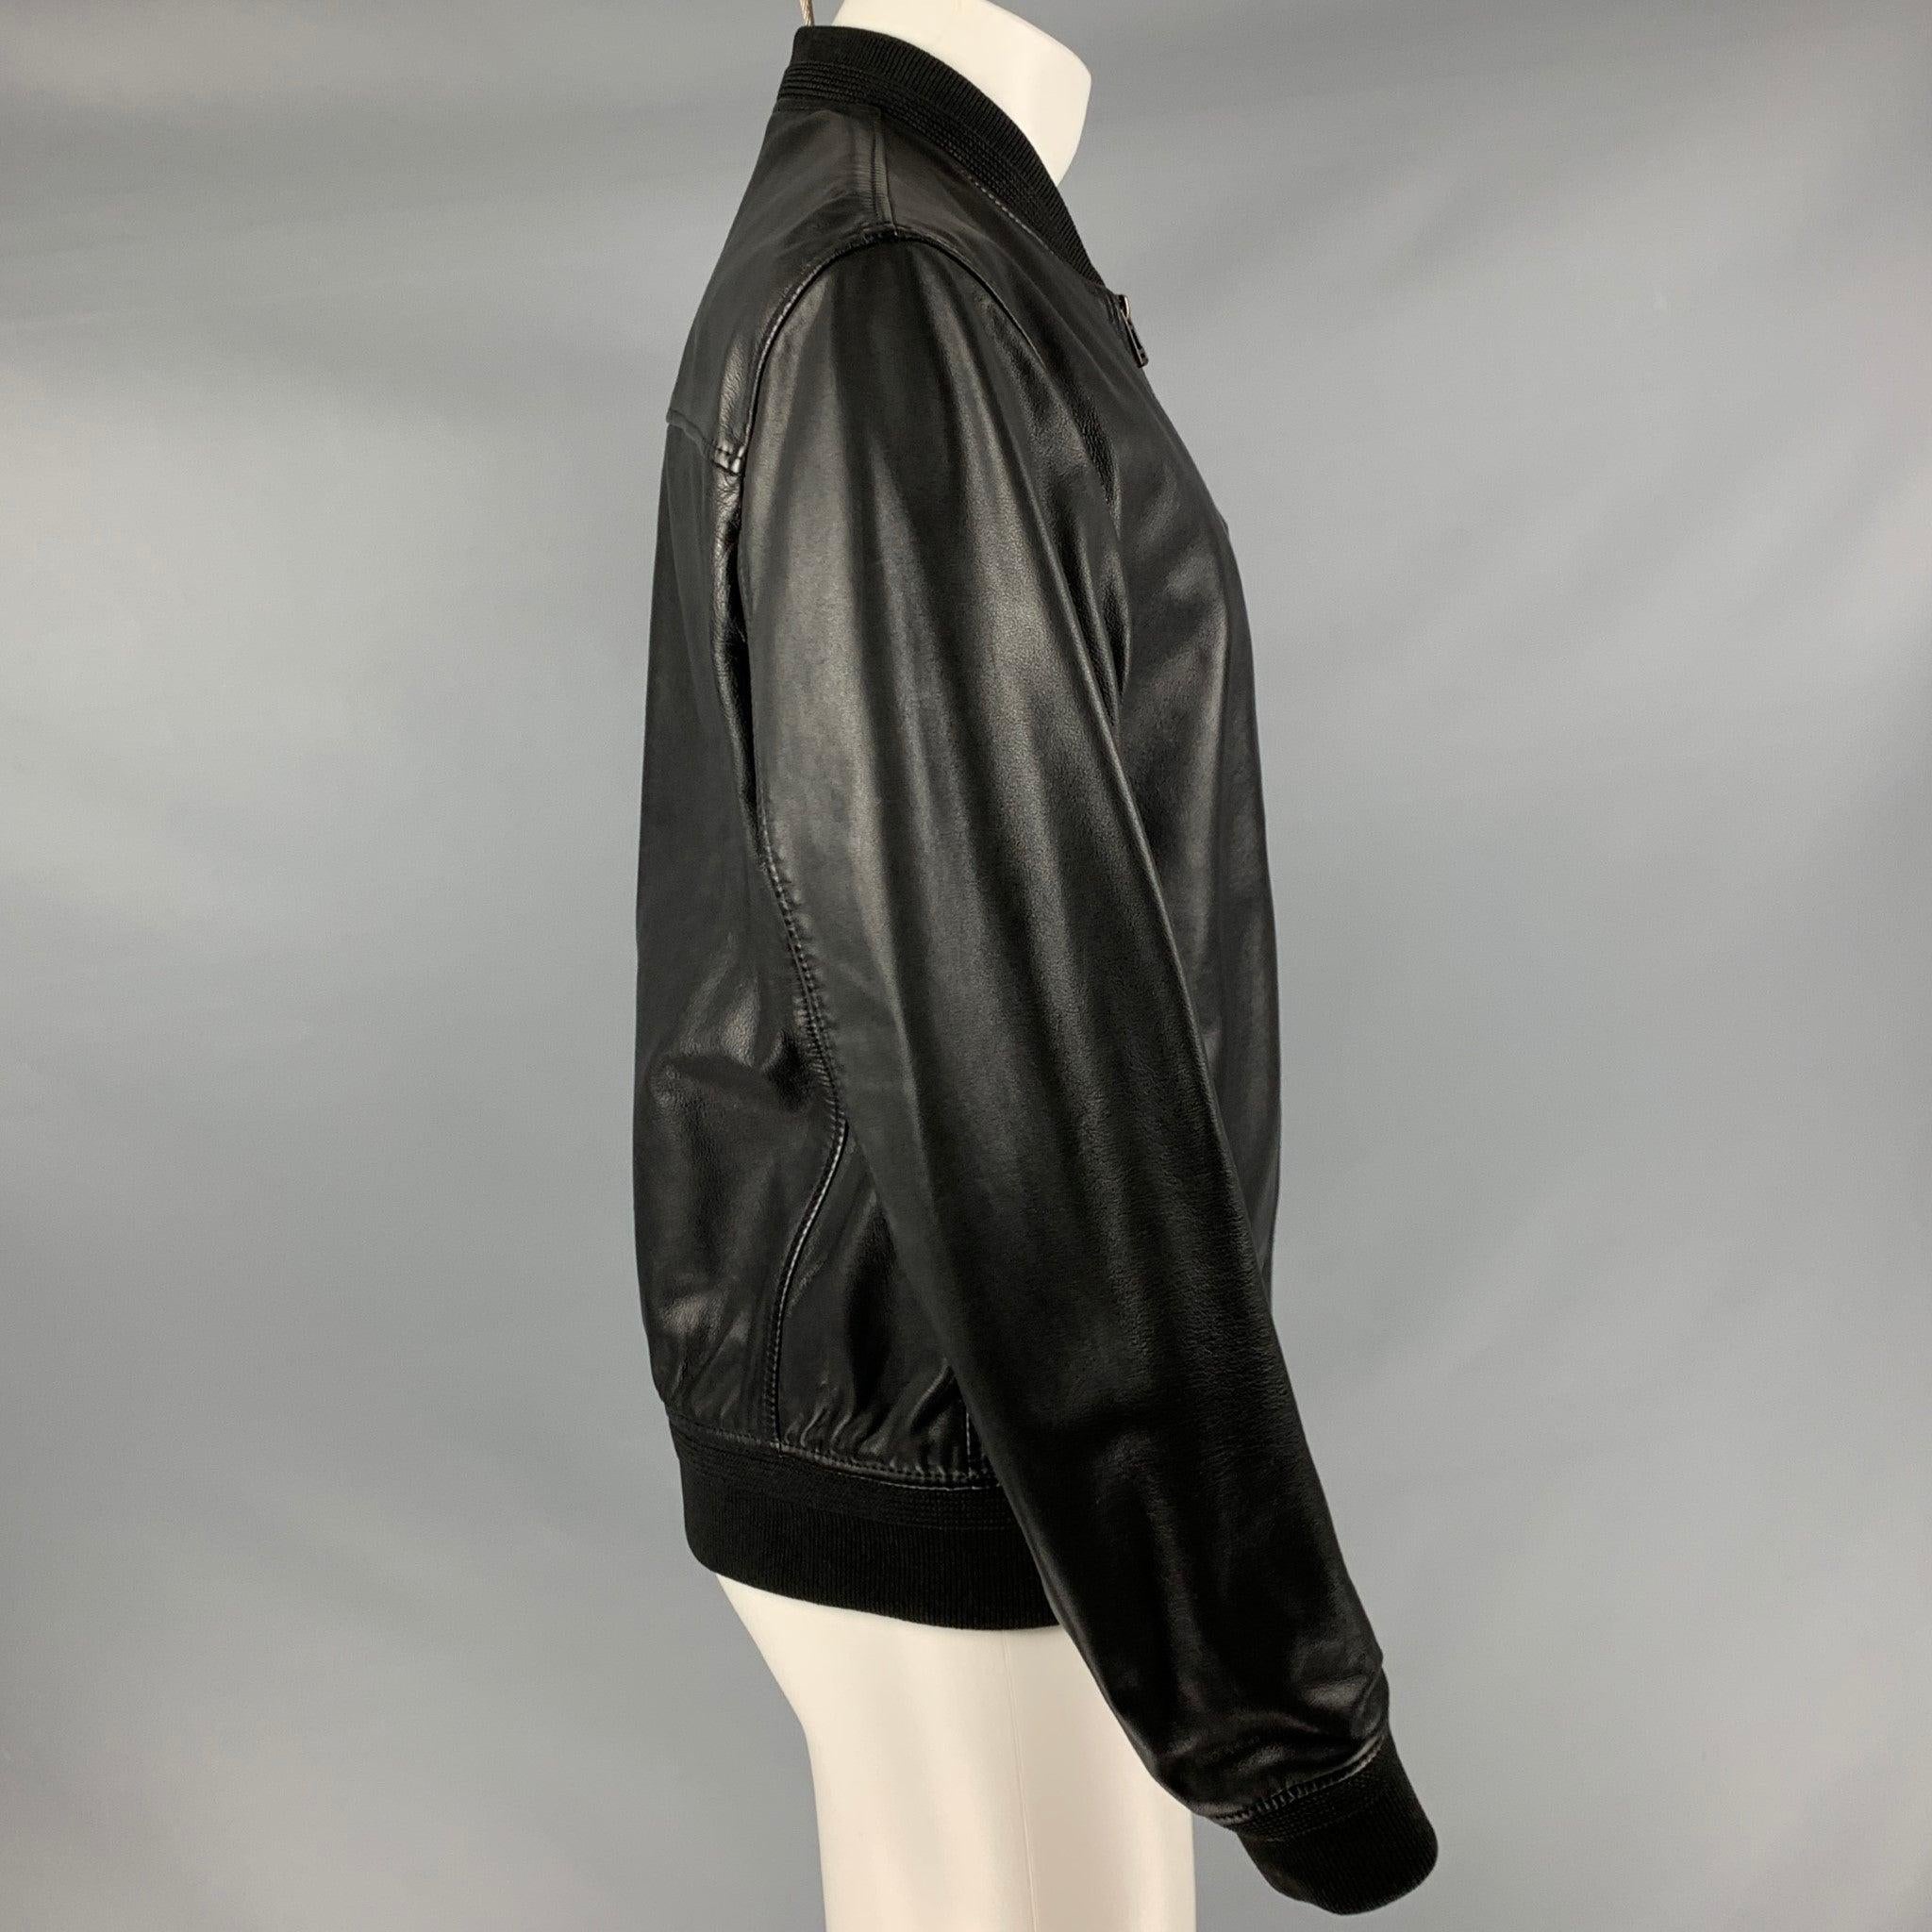 BELSTAFF
jacket in black sheep leather fabric featuring viscose lining, bomber style, ribbed collar, and zip up closure.New with Tags. 

Marked:   38 

Measurements: 
 
Shoulder: 17.5 inches Chest: 38 inches Sleeve: 25.5 inches Length: 26 inches 
 